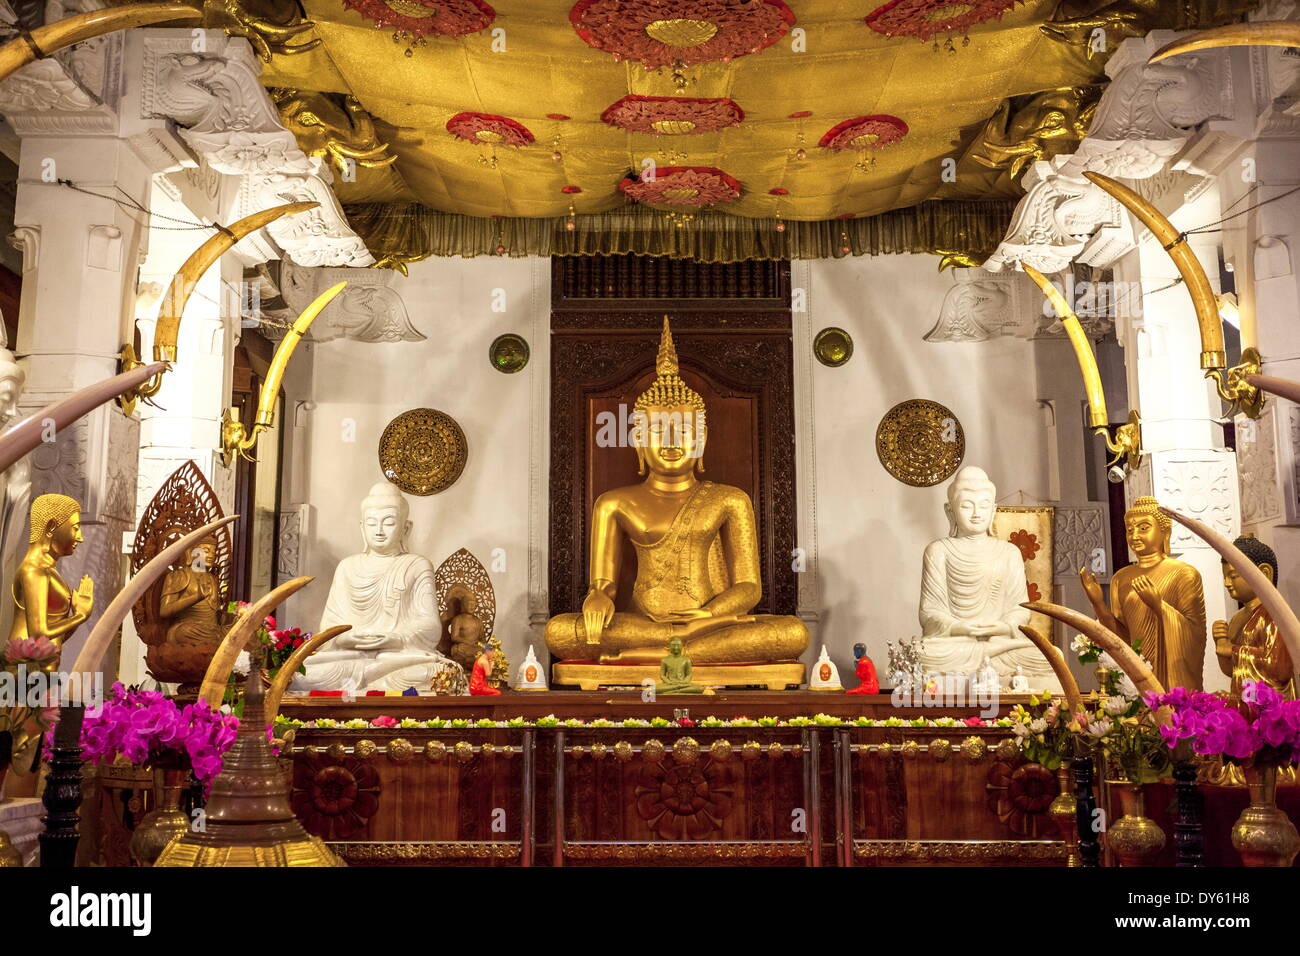 Golden sitting Buddhist statue, Temple of the Sacred Tooth Relic, UNESCO World Heritage Site, Kandy, Sri Lanka, Asia Stock Photo